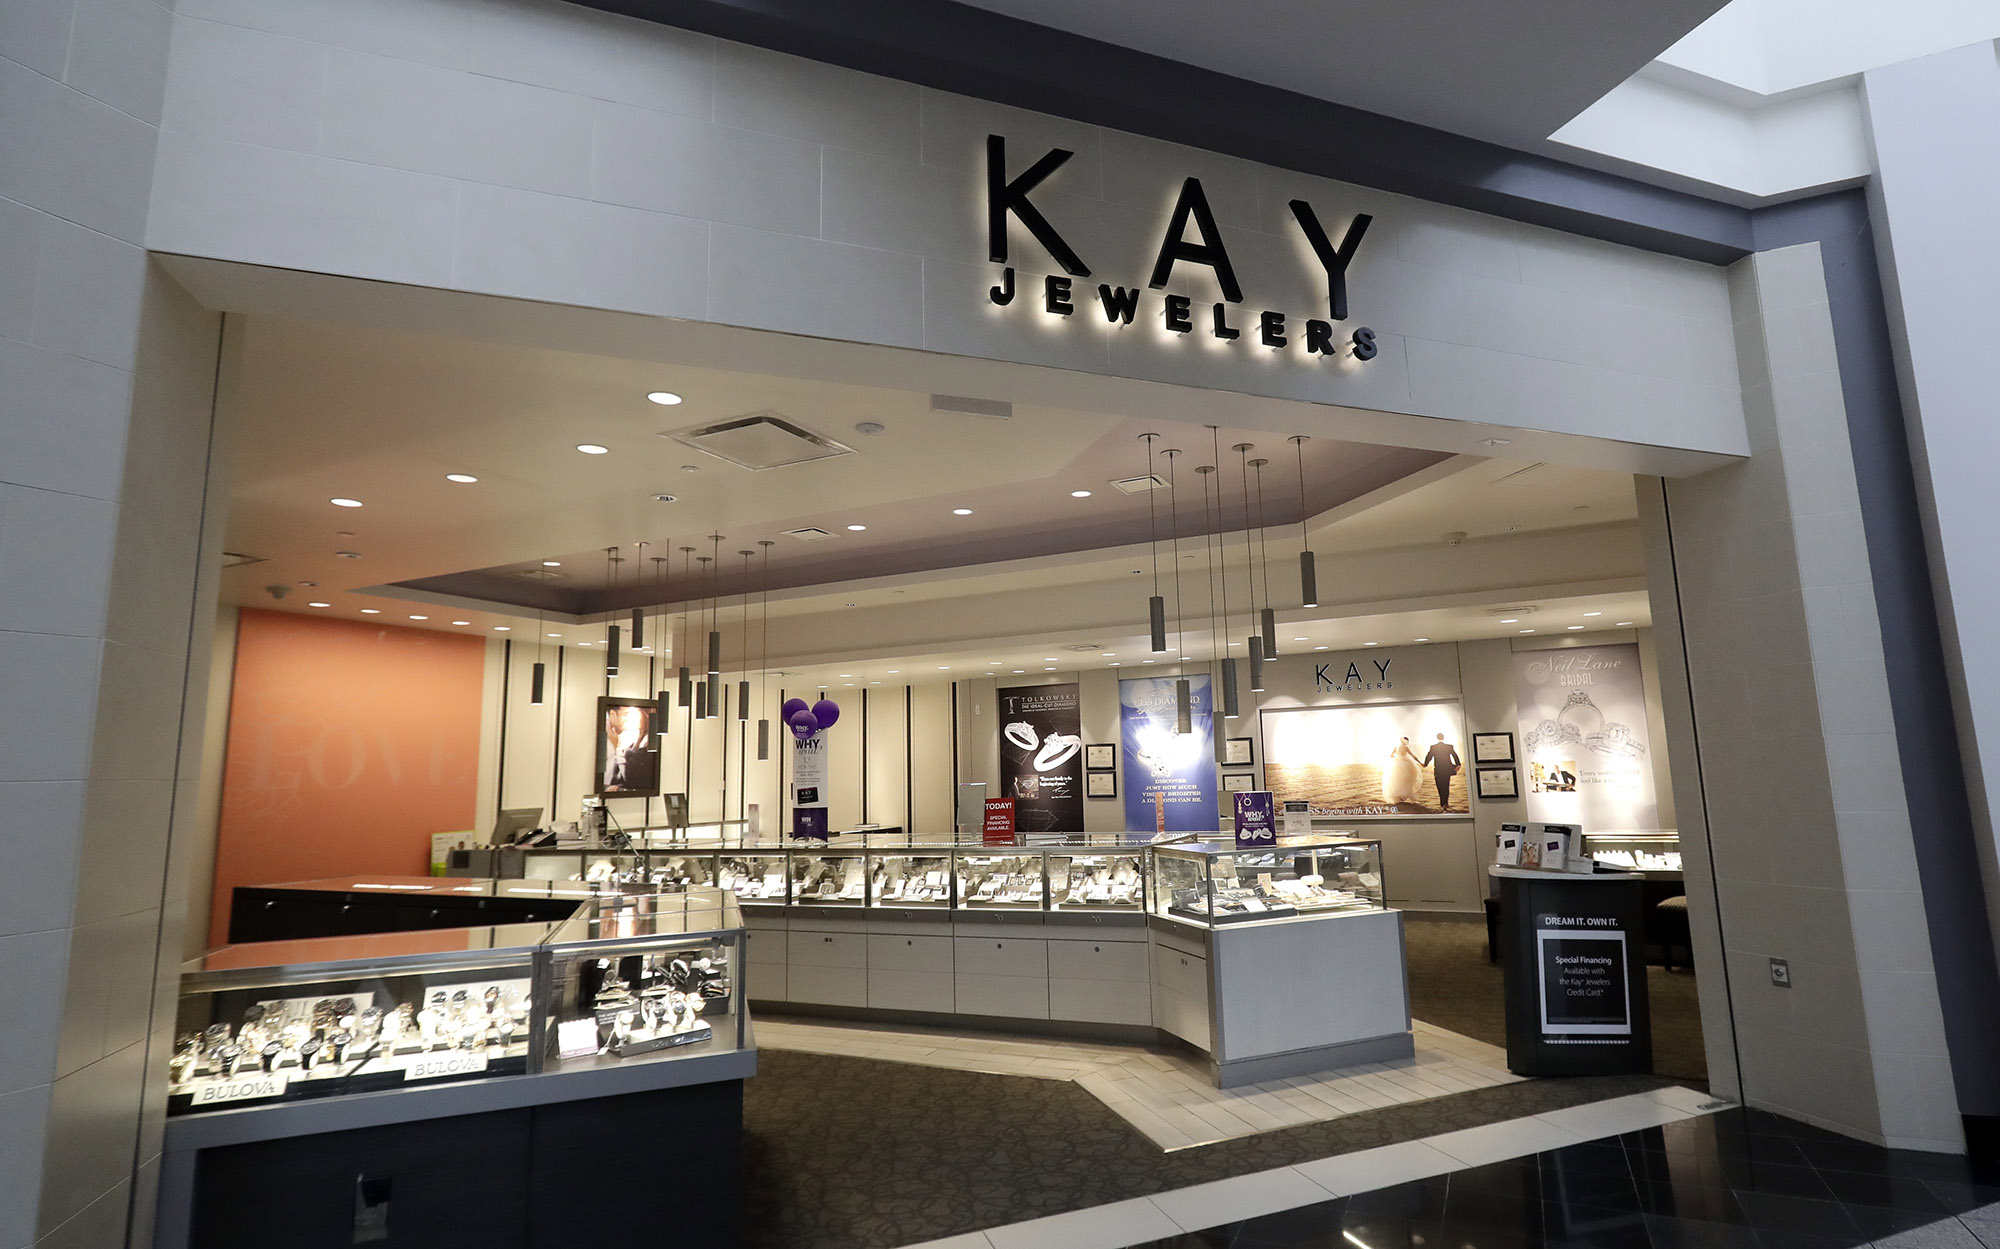 (SIG) Predicts Sales of 10 Billion for Kay, Zales on Wedding